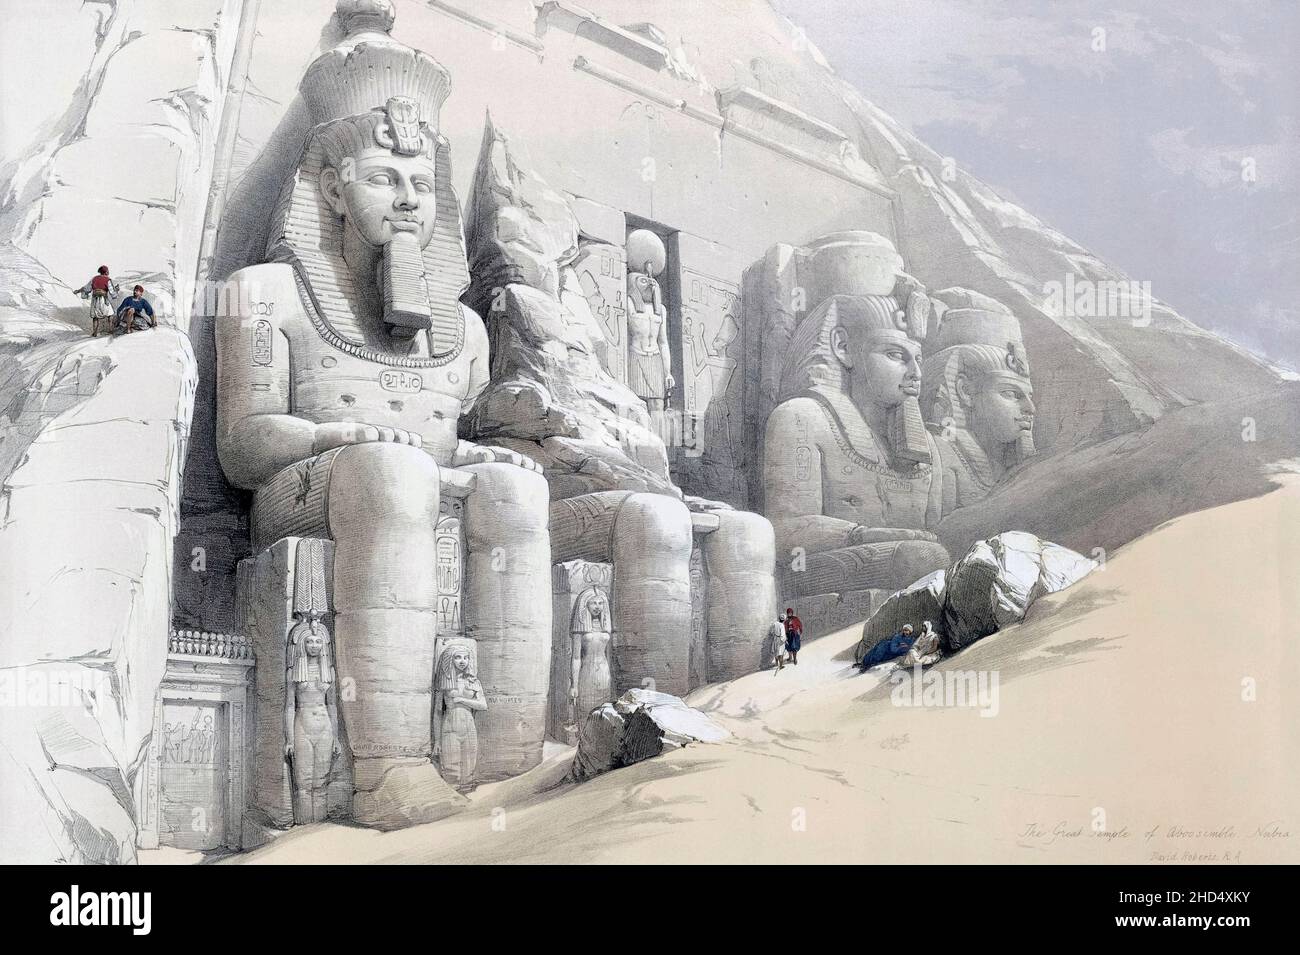 Colossal Figures In Front Of The Great Temple Of Aboo-Simbel.  After a work by Scottish artist David Roberts, 1796-1864 and Belgian lithographer Louis Haghe, 1806-1885.  From volume 4 of The Holy Land, Syria, Idumea, Arabia, Egypt, and Nubia.  The six volumes were published between 1842 and 1849. Stock Photo